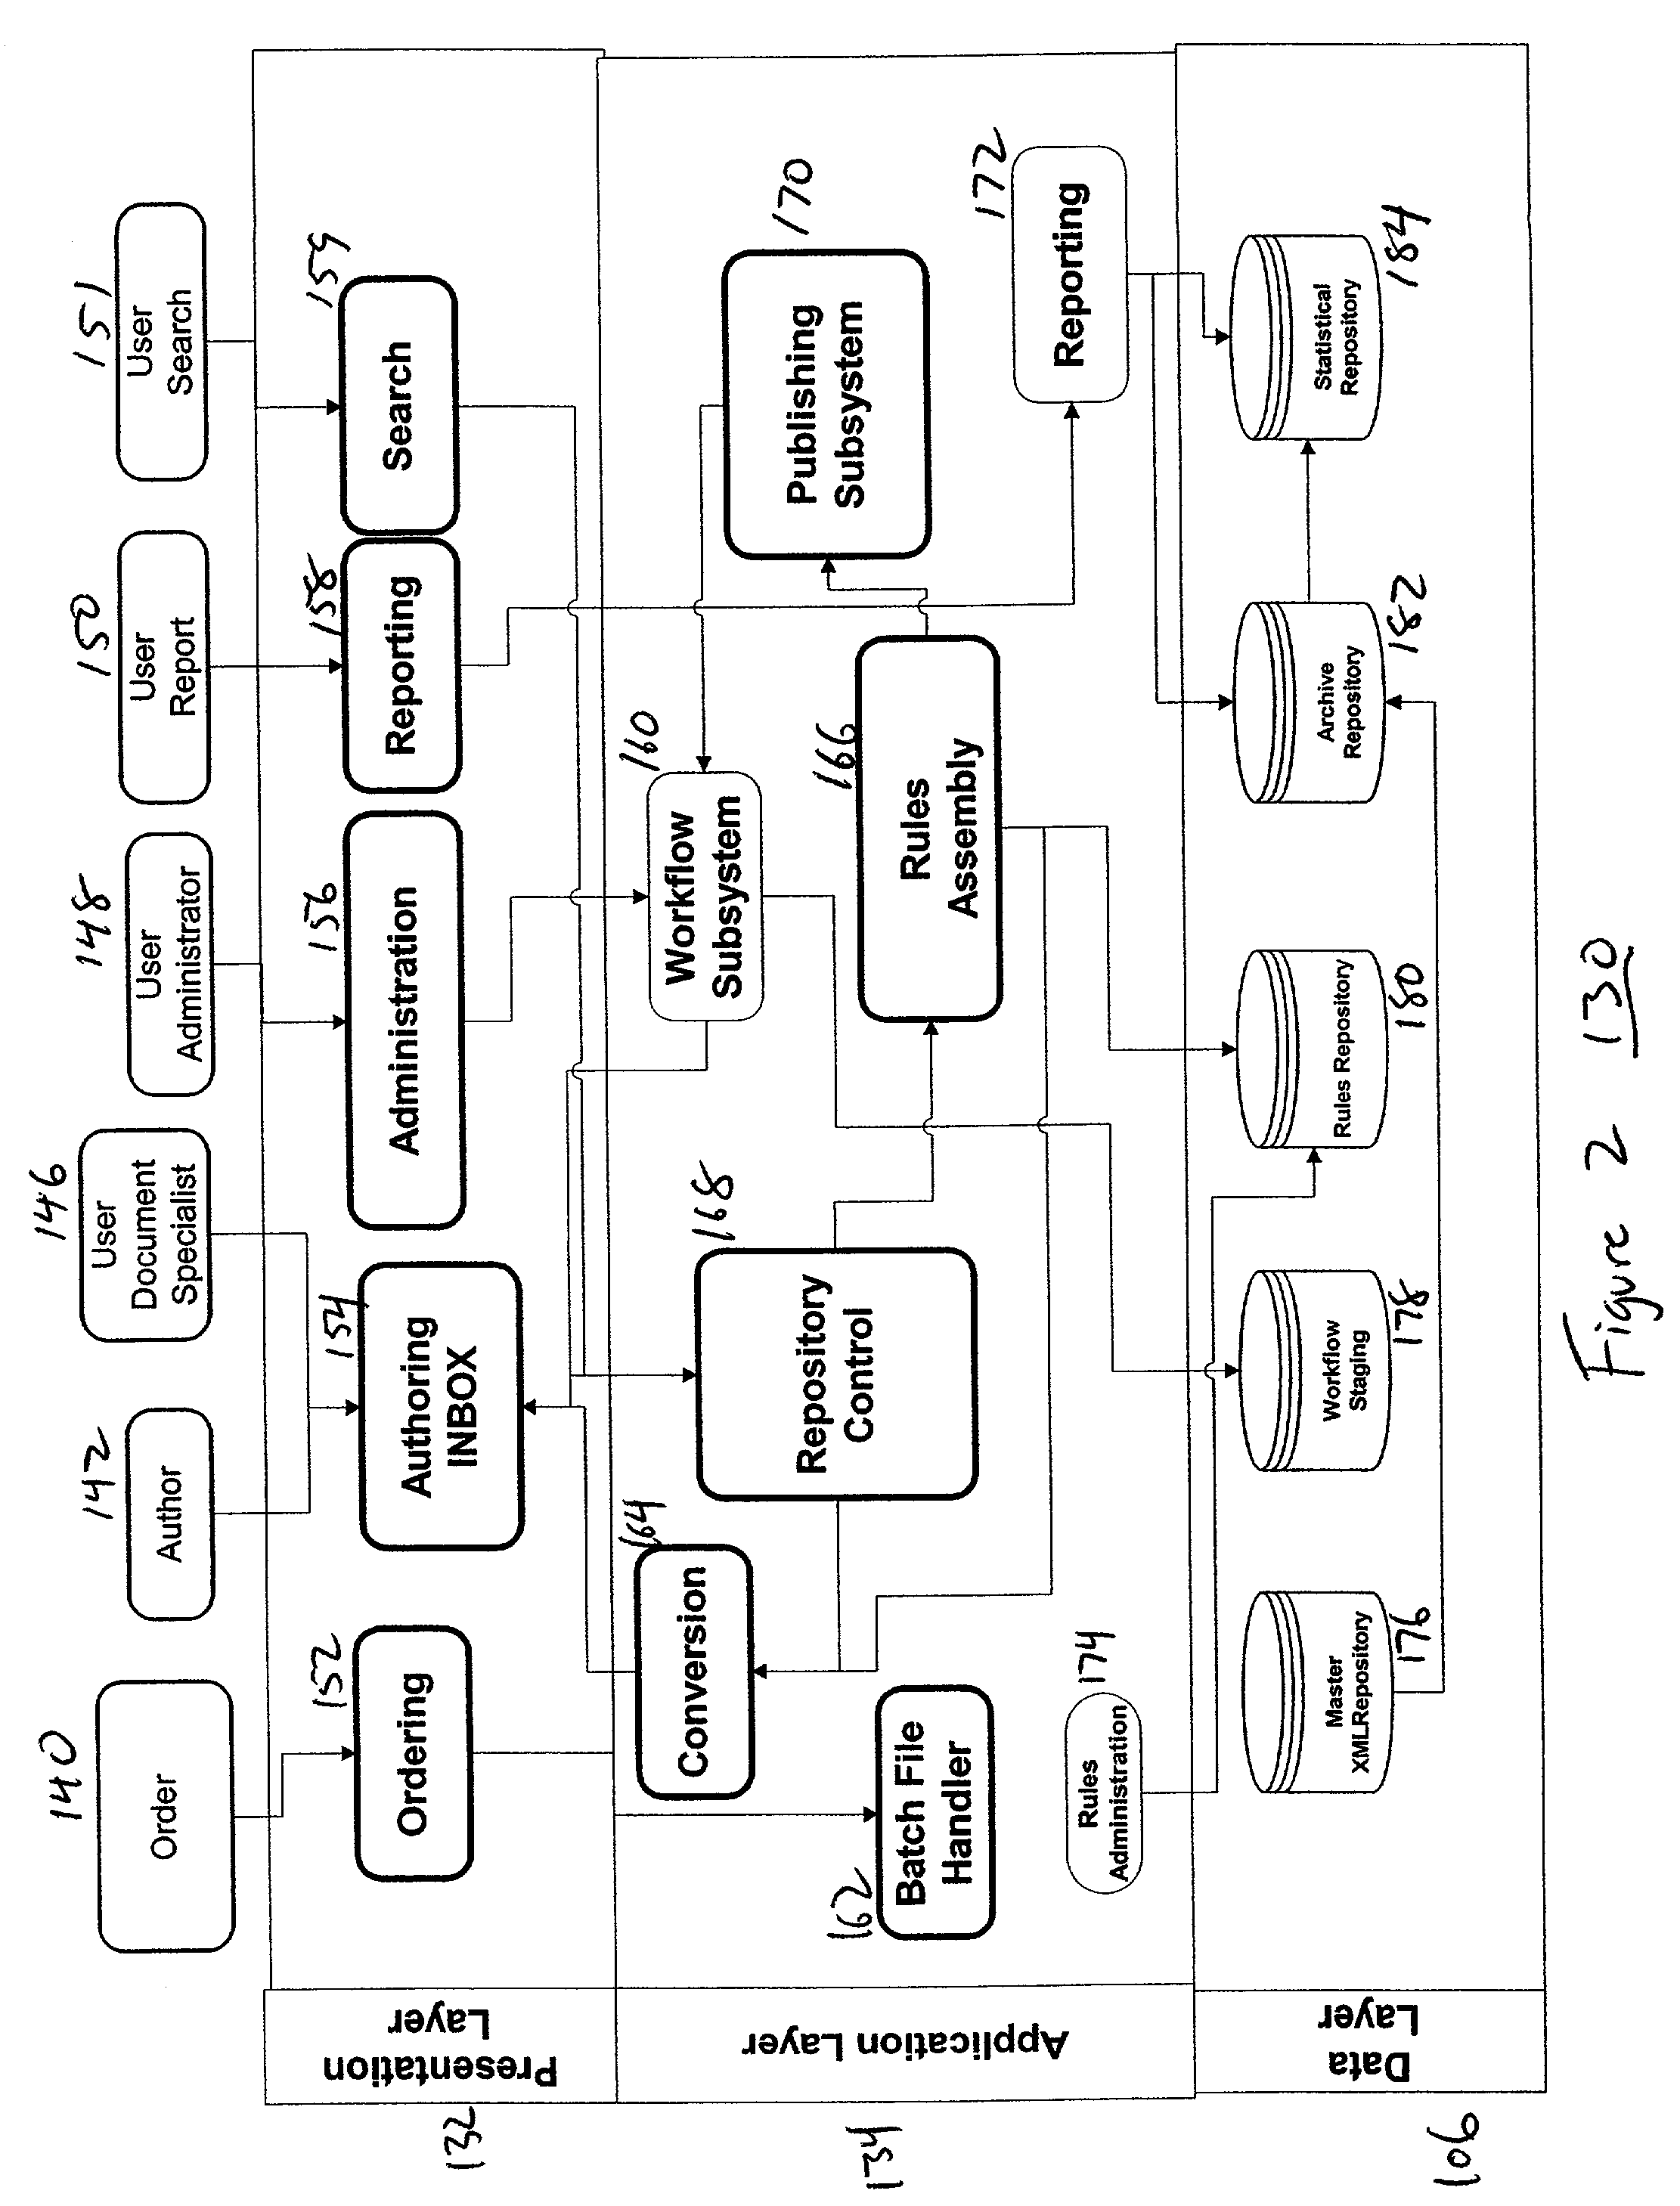 Document rules data structure and method of document publication therefrom